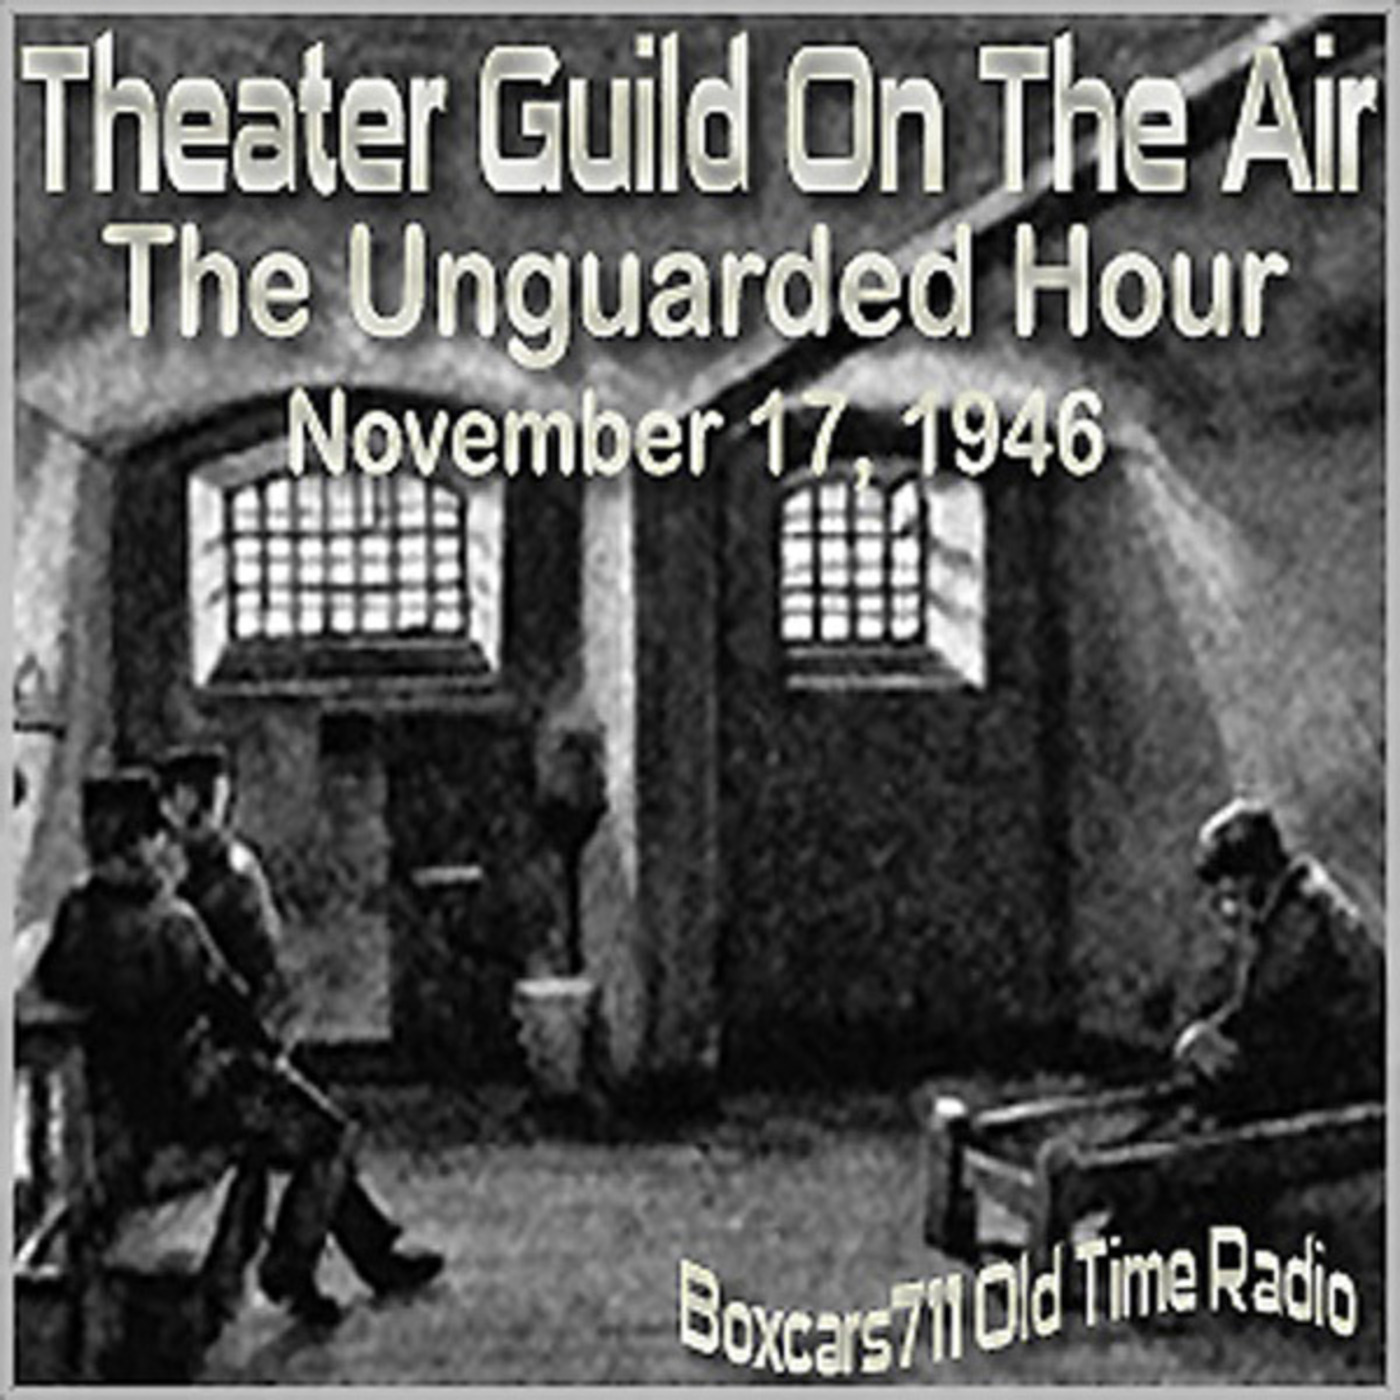 Episode 9505: Theater Guild On The Air - 